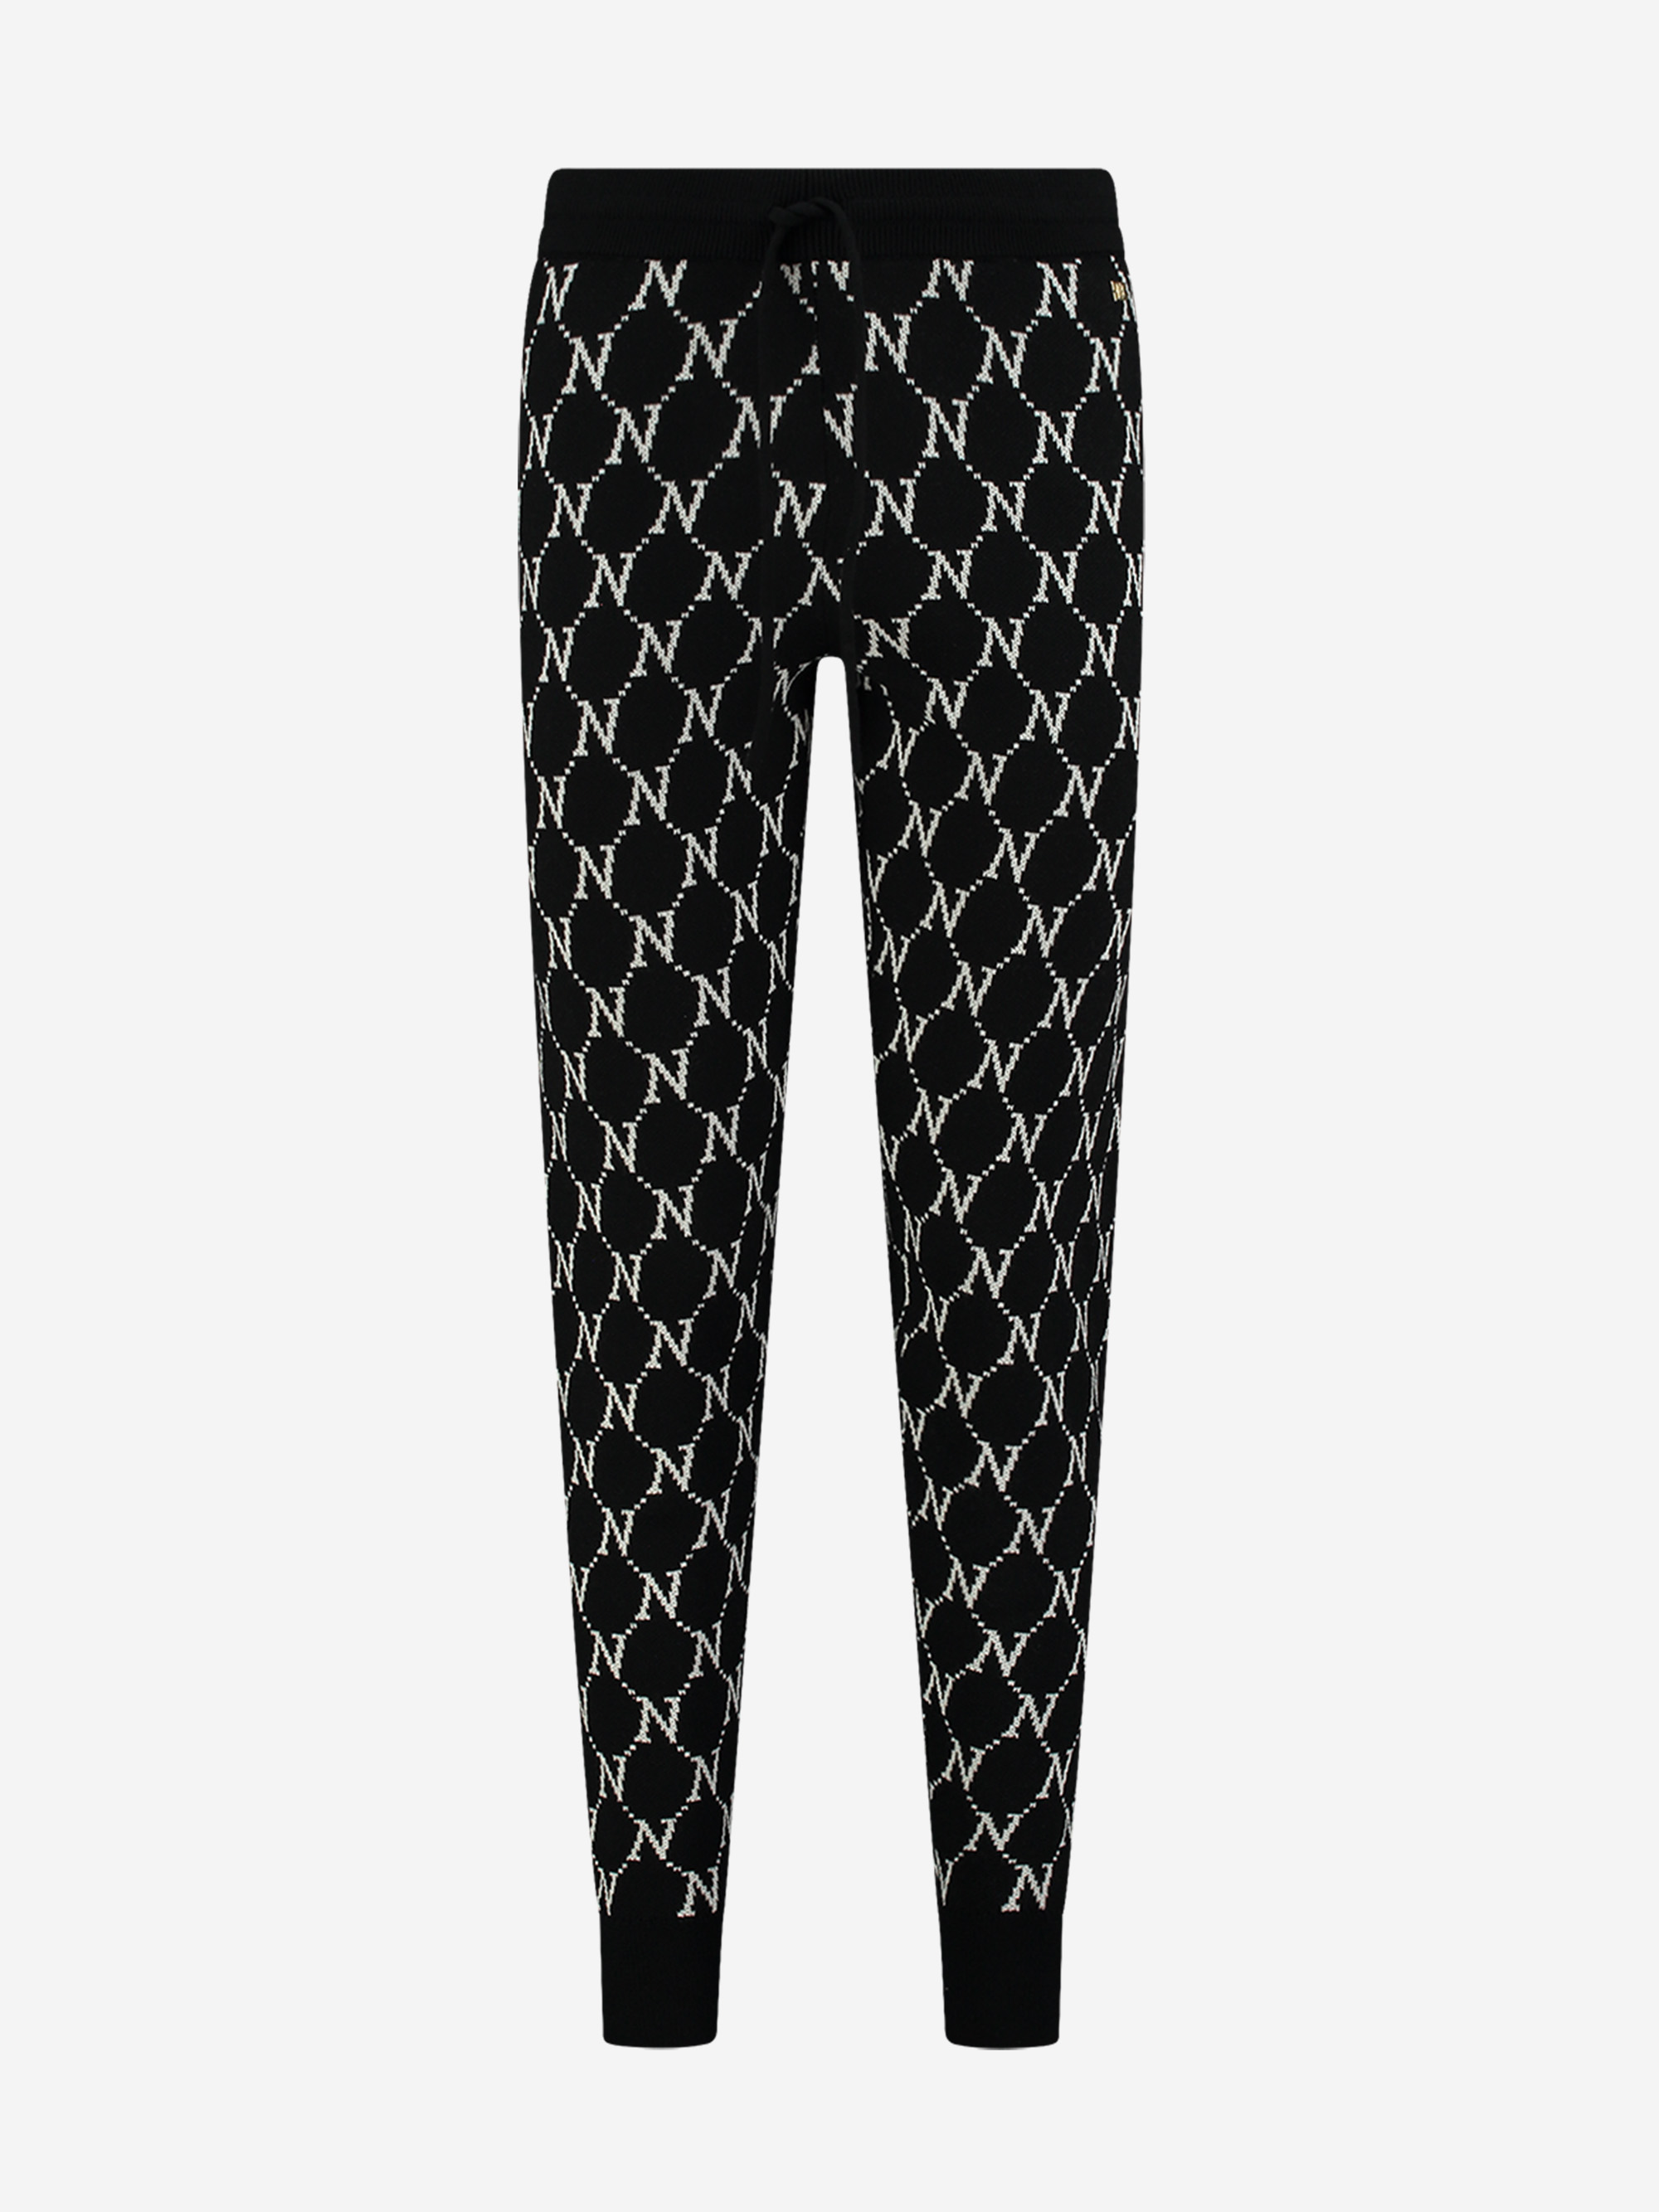 Soft pants with logo pattern